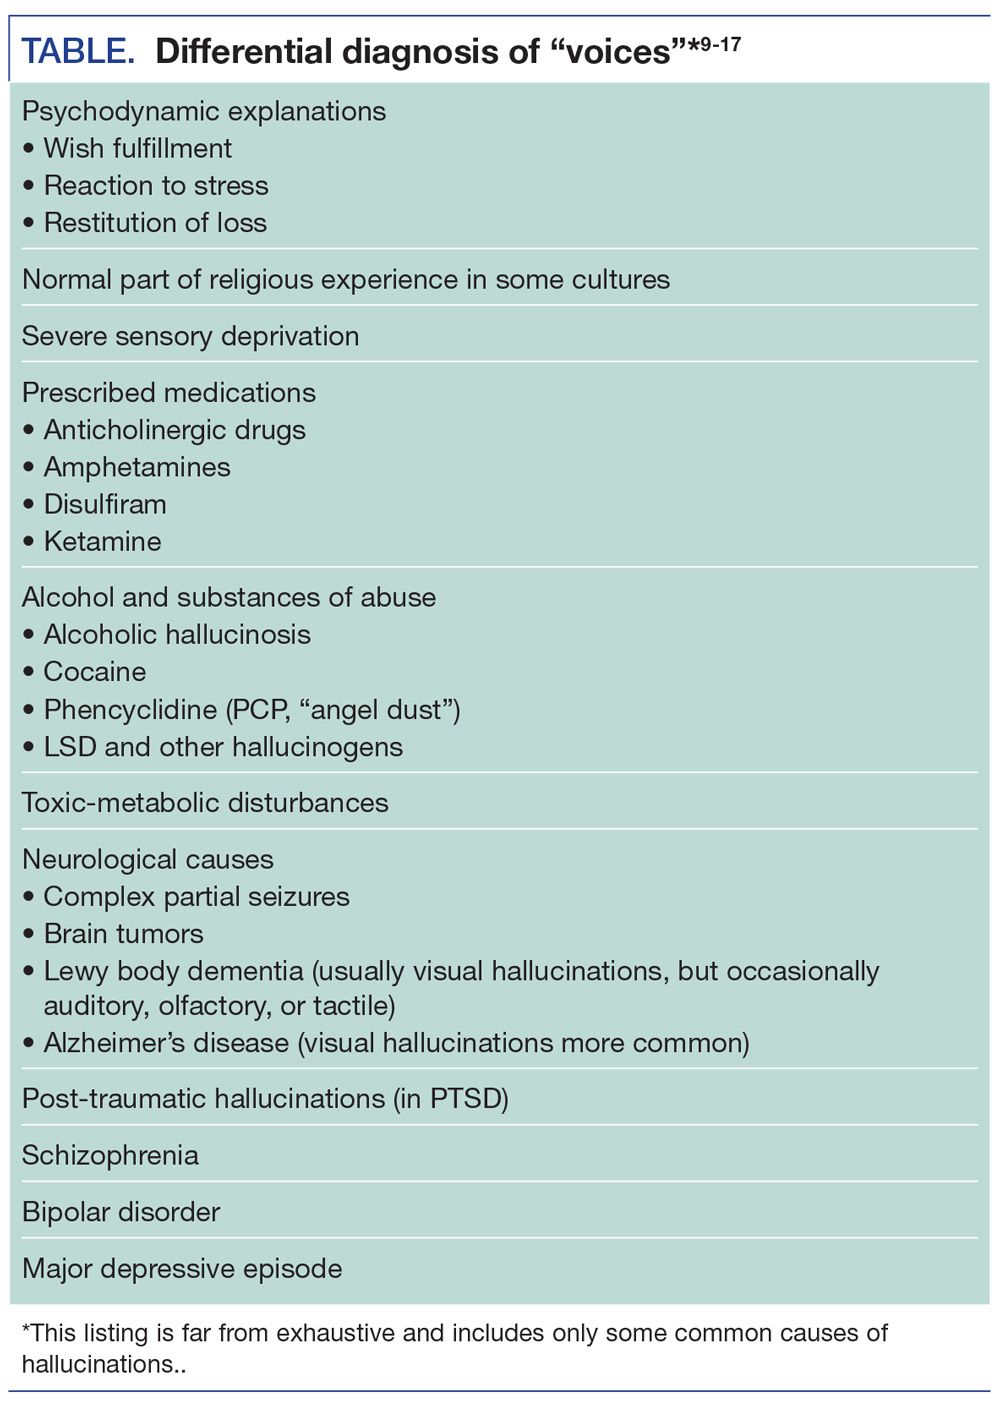 Differential diagnosis of “voices”